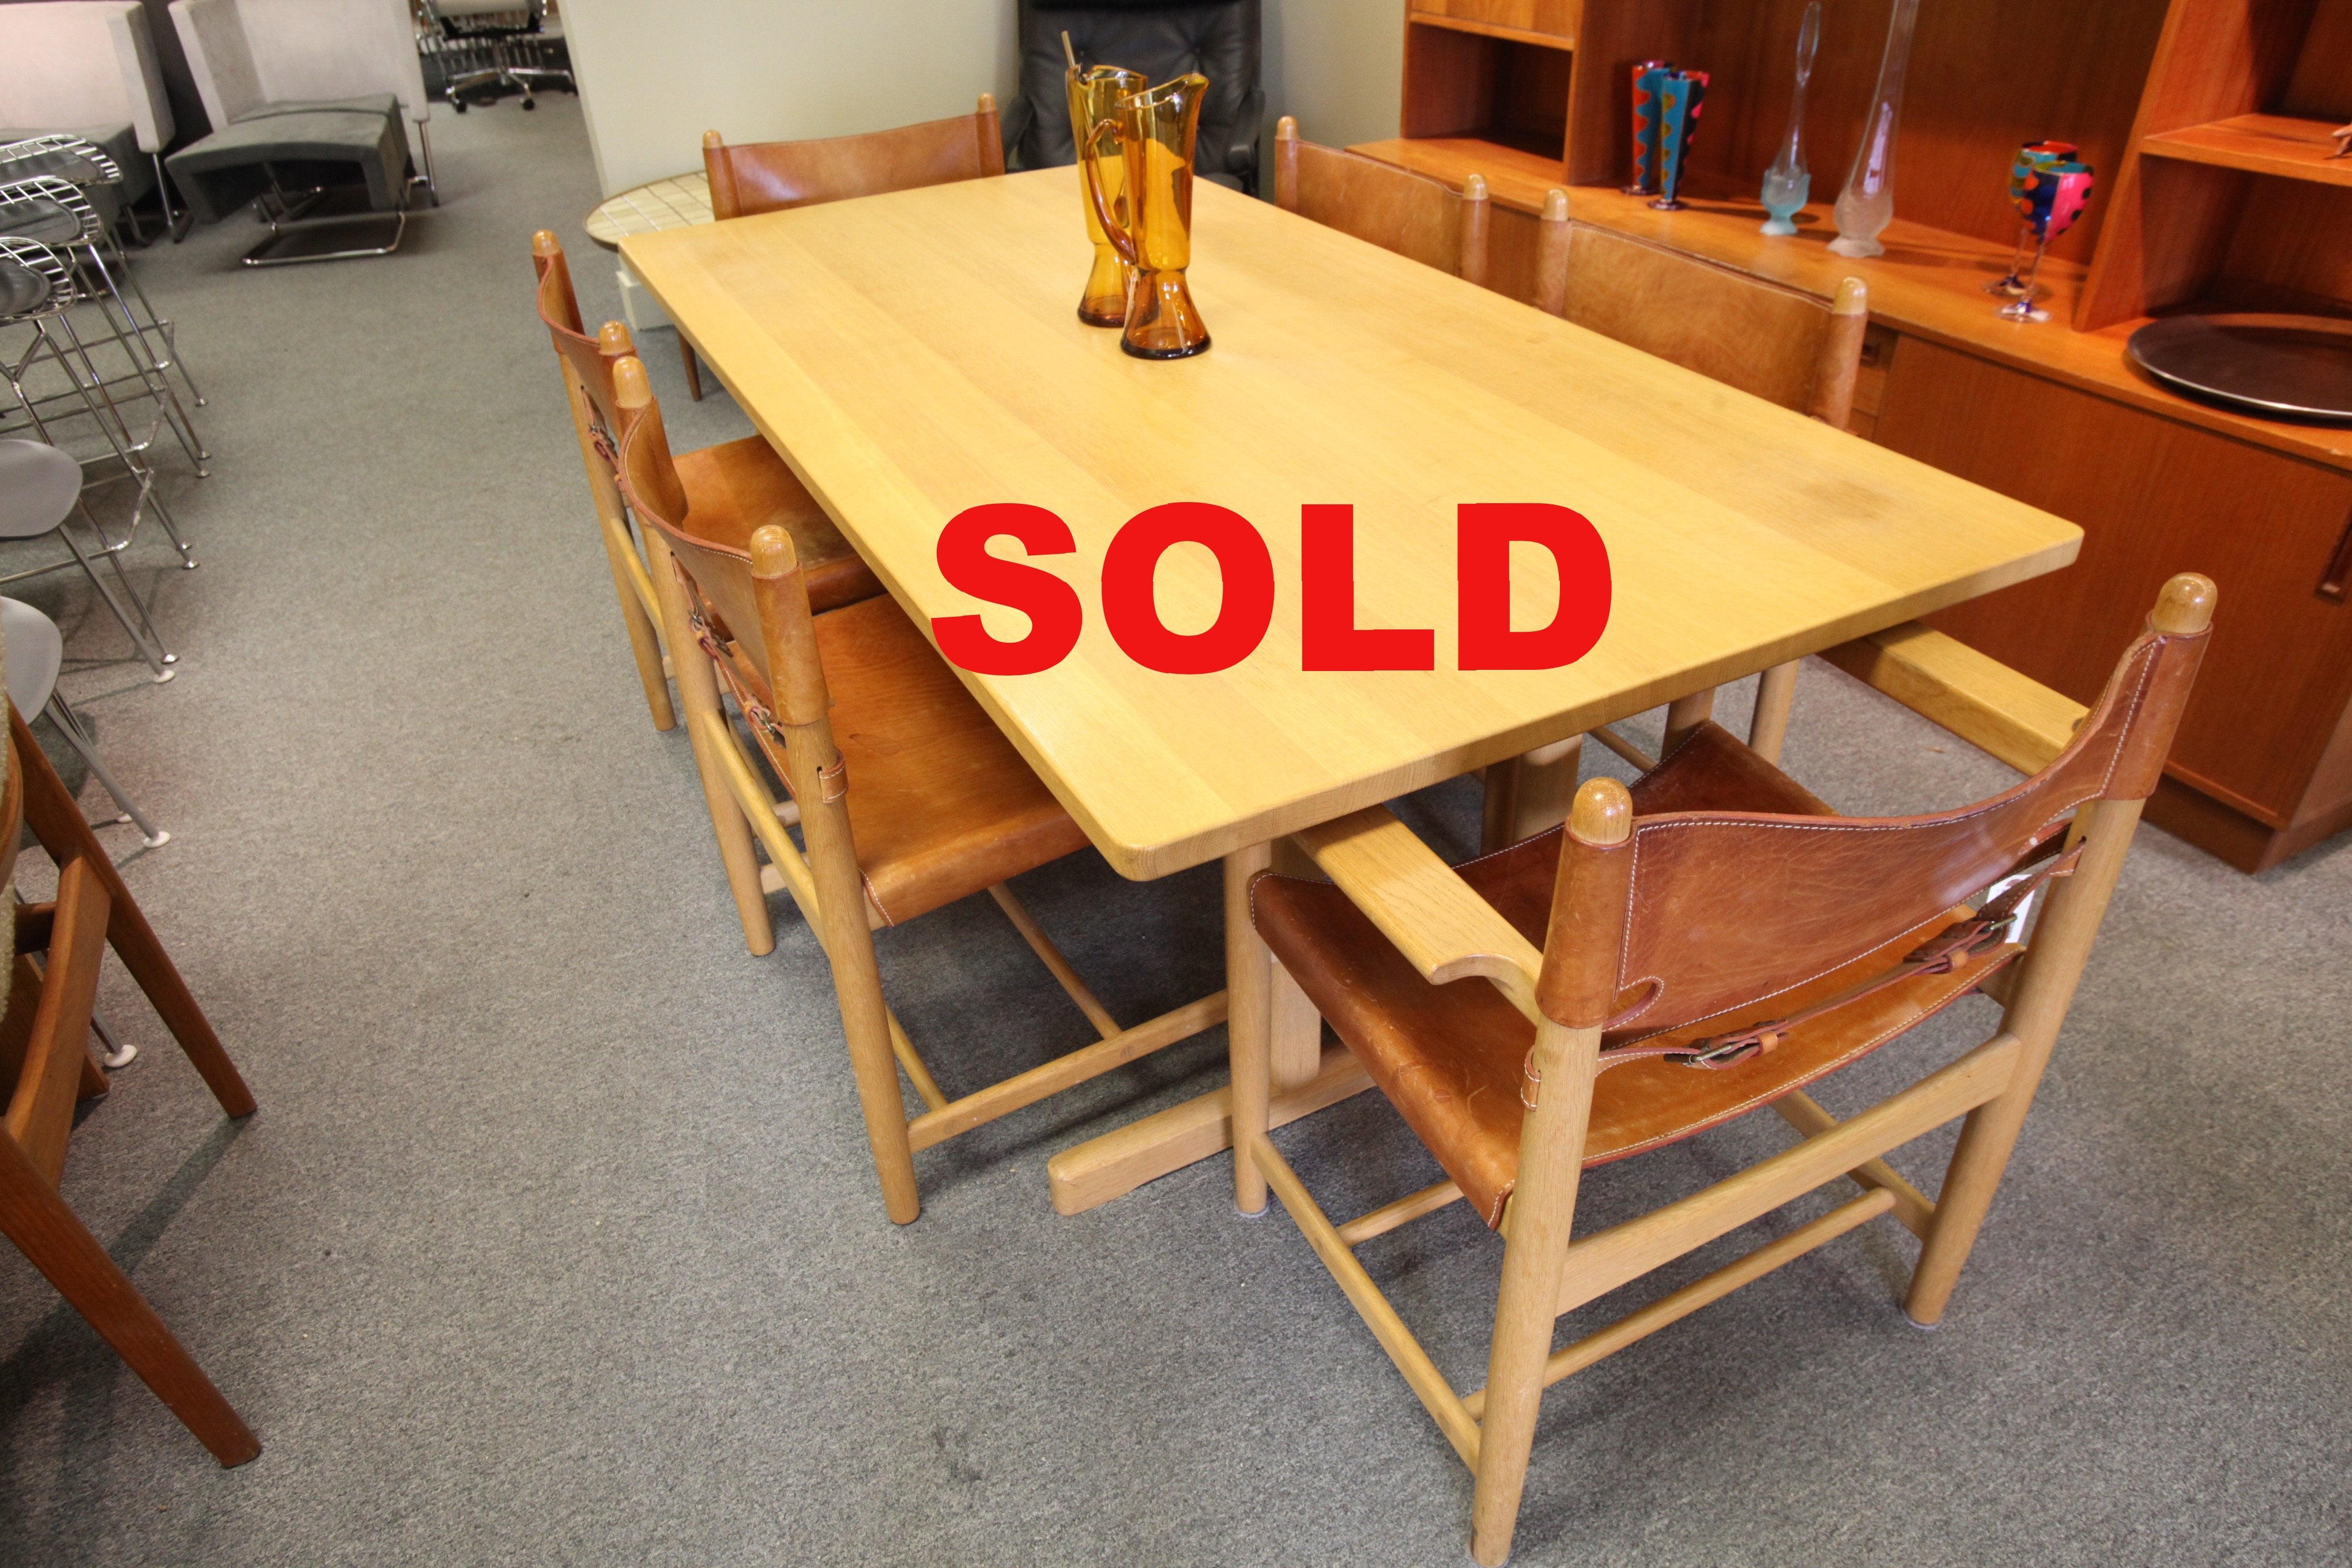 Solid Oak Danish Dining Table by Borge Mogensen (77" x 38" x 27.5"H)